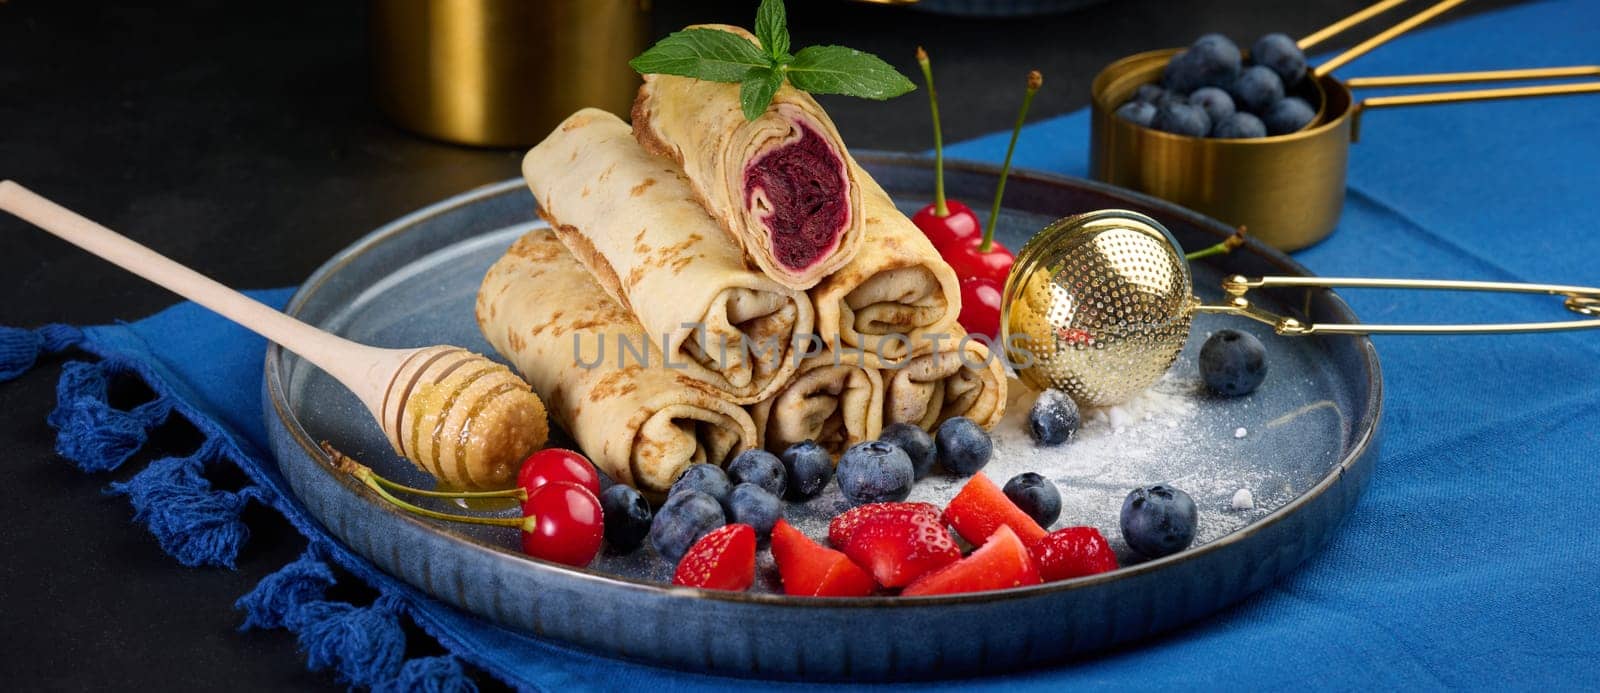 Crepes stacked in a pile, one of which is cut and filled with berry filling. The plate is also decorated with blueberries, strawberries, and cherries, a honey dipper with honey, a sprig of mint, and a golden sieve. A dark blue tablecloth.